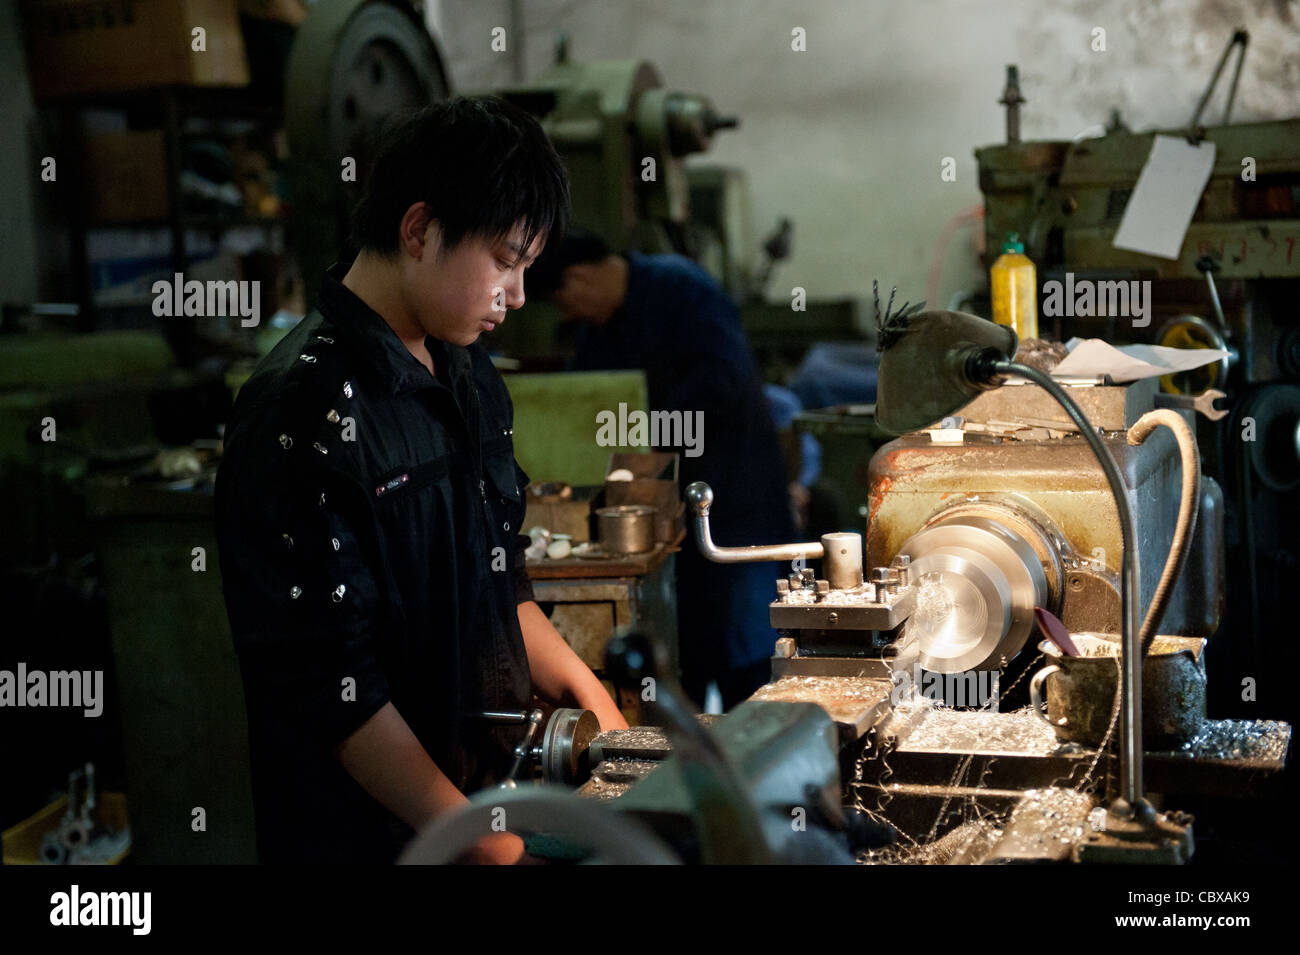 Workers in a metallurgy workshop Stock Photo